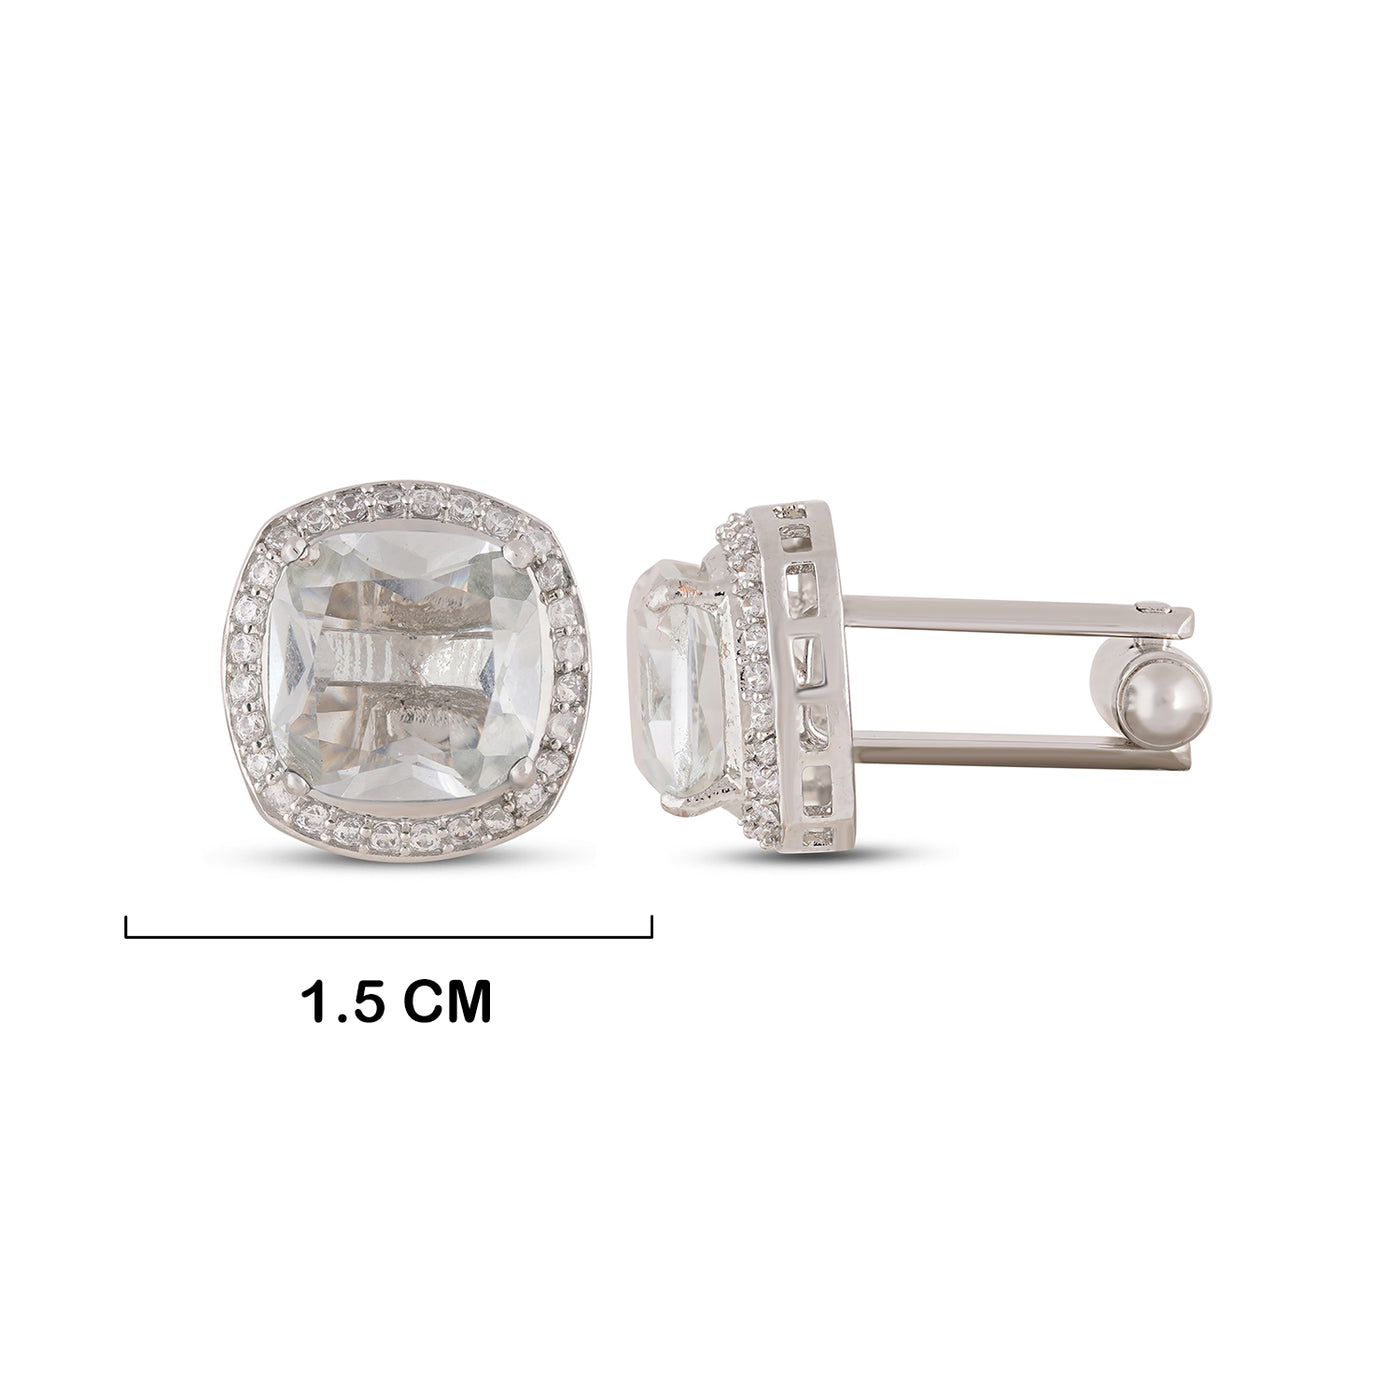  Hydro Glass Cufflinks with measurements in cm. 1.5cm.